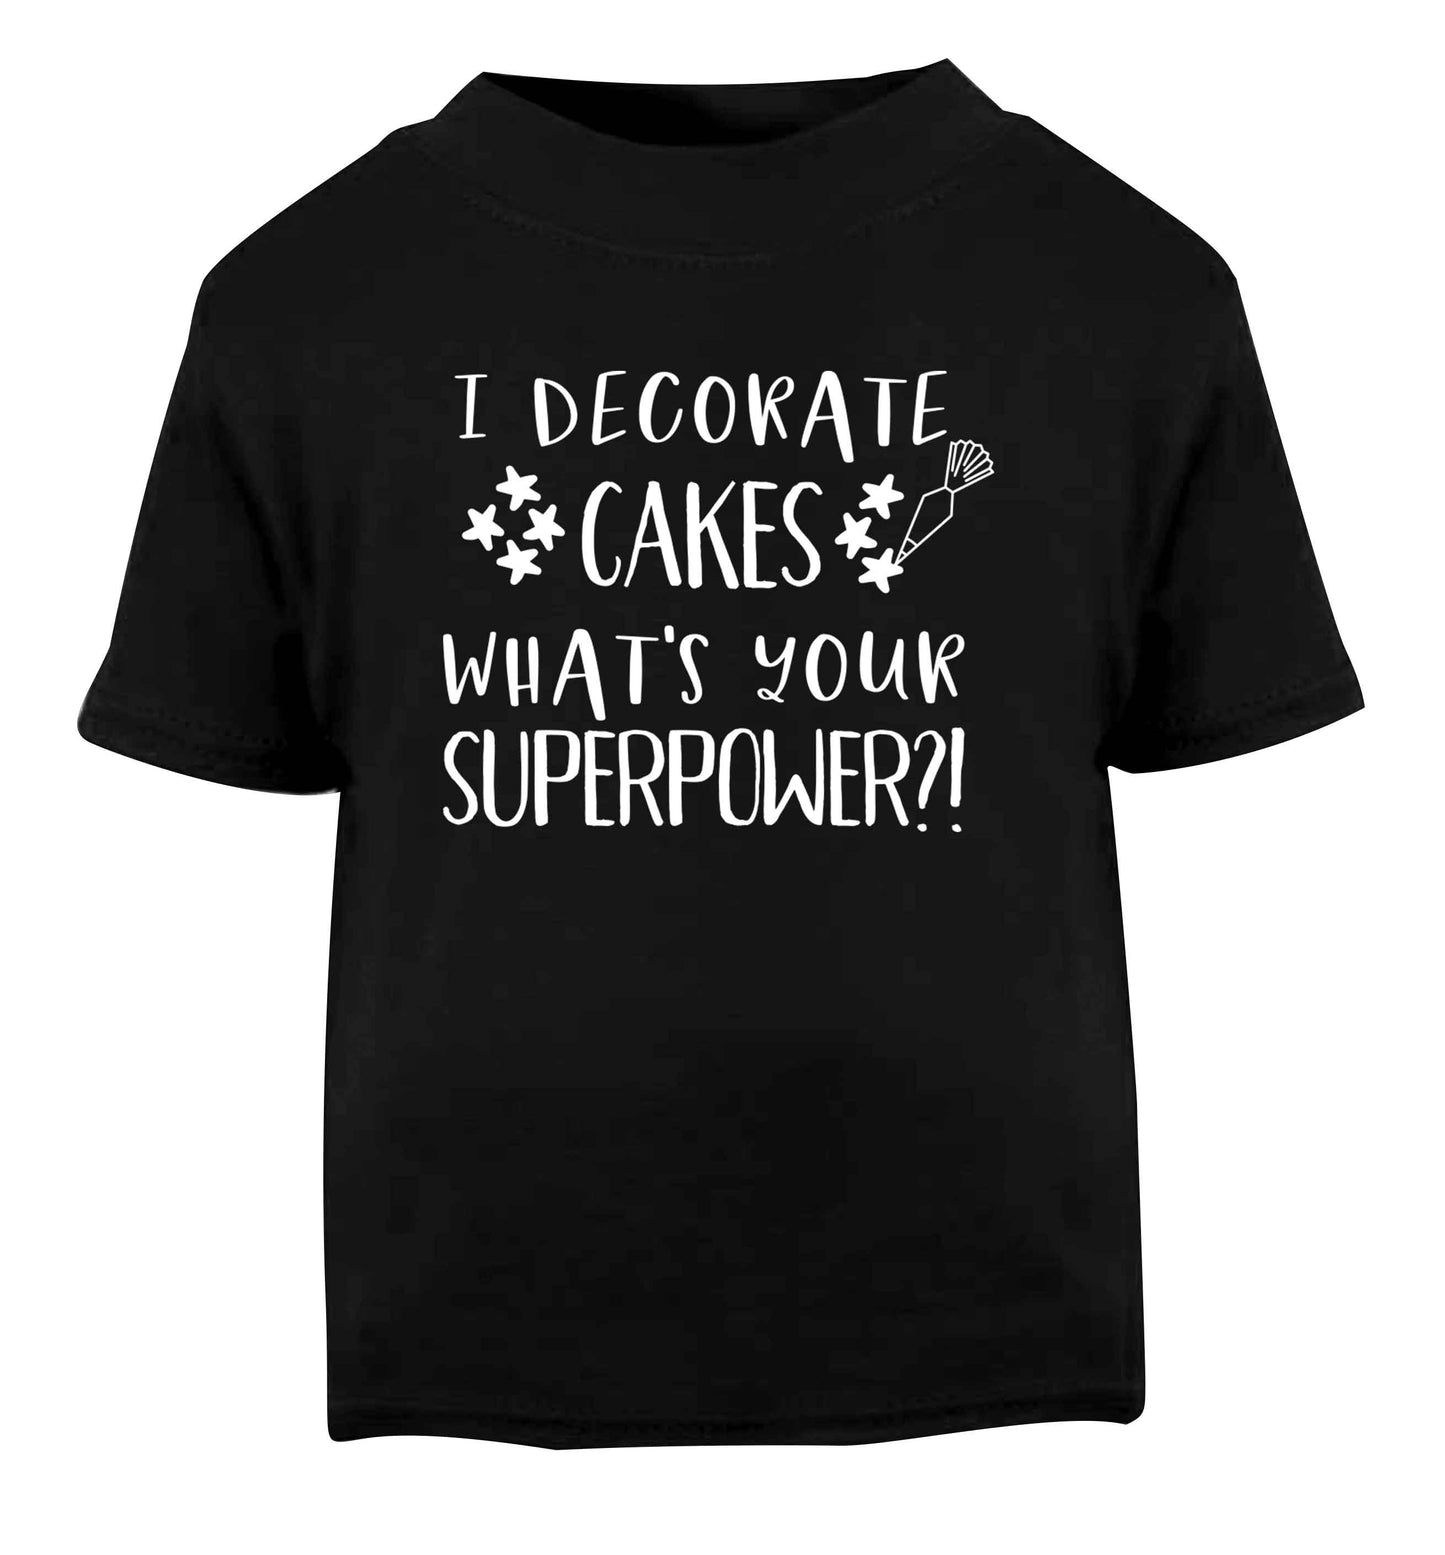 I decorate cakes what's your superpower?! Black Baby Toddler Tshirt 2 years